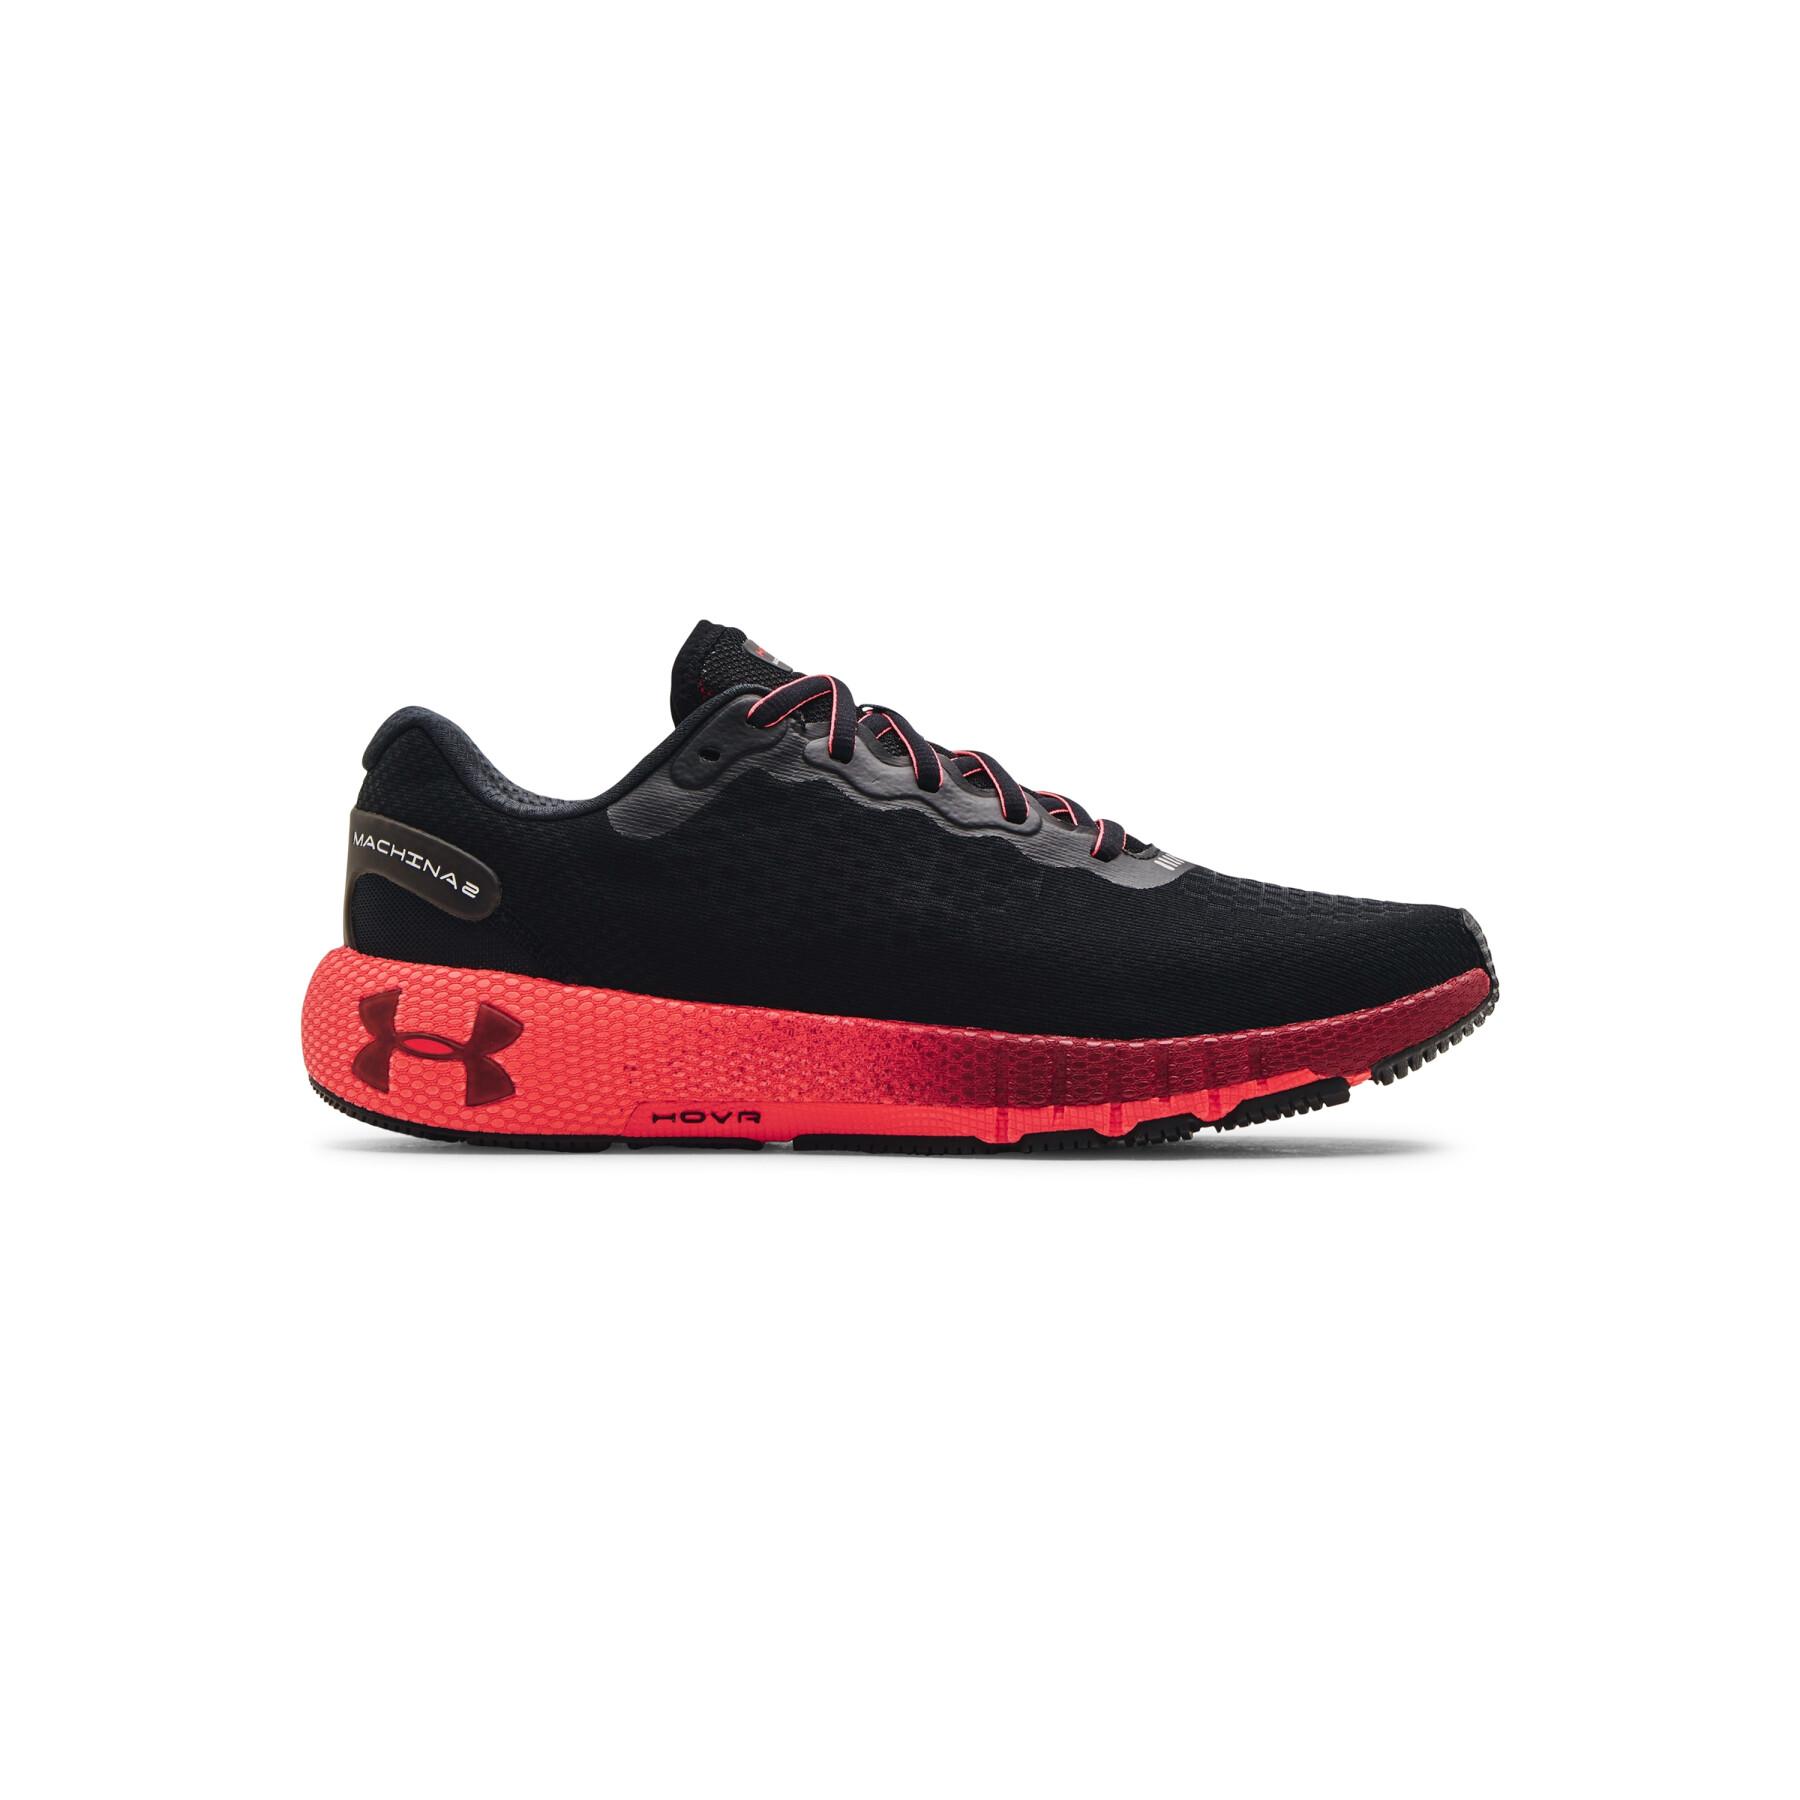 Running shoes Under Armour Hovr Machina 2